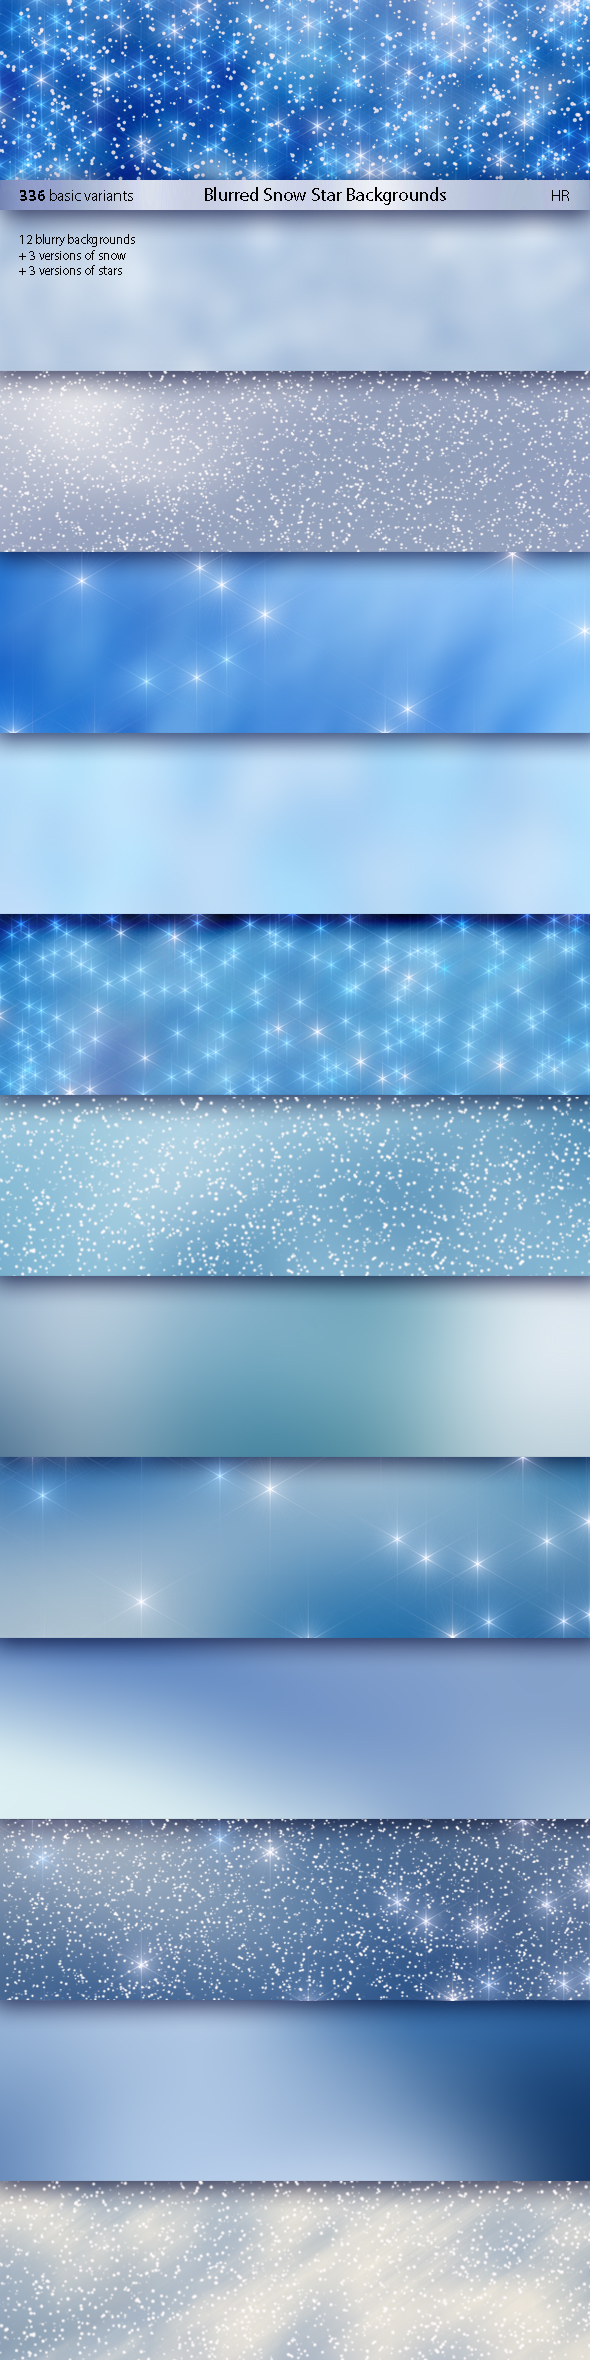 Blurred Snow Star Backgrounds